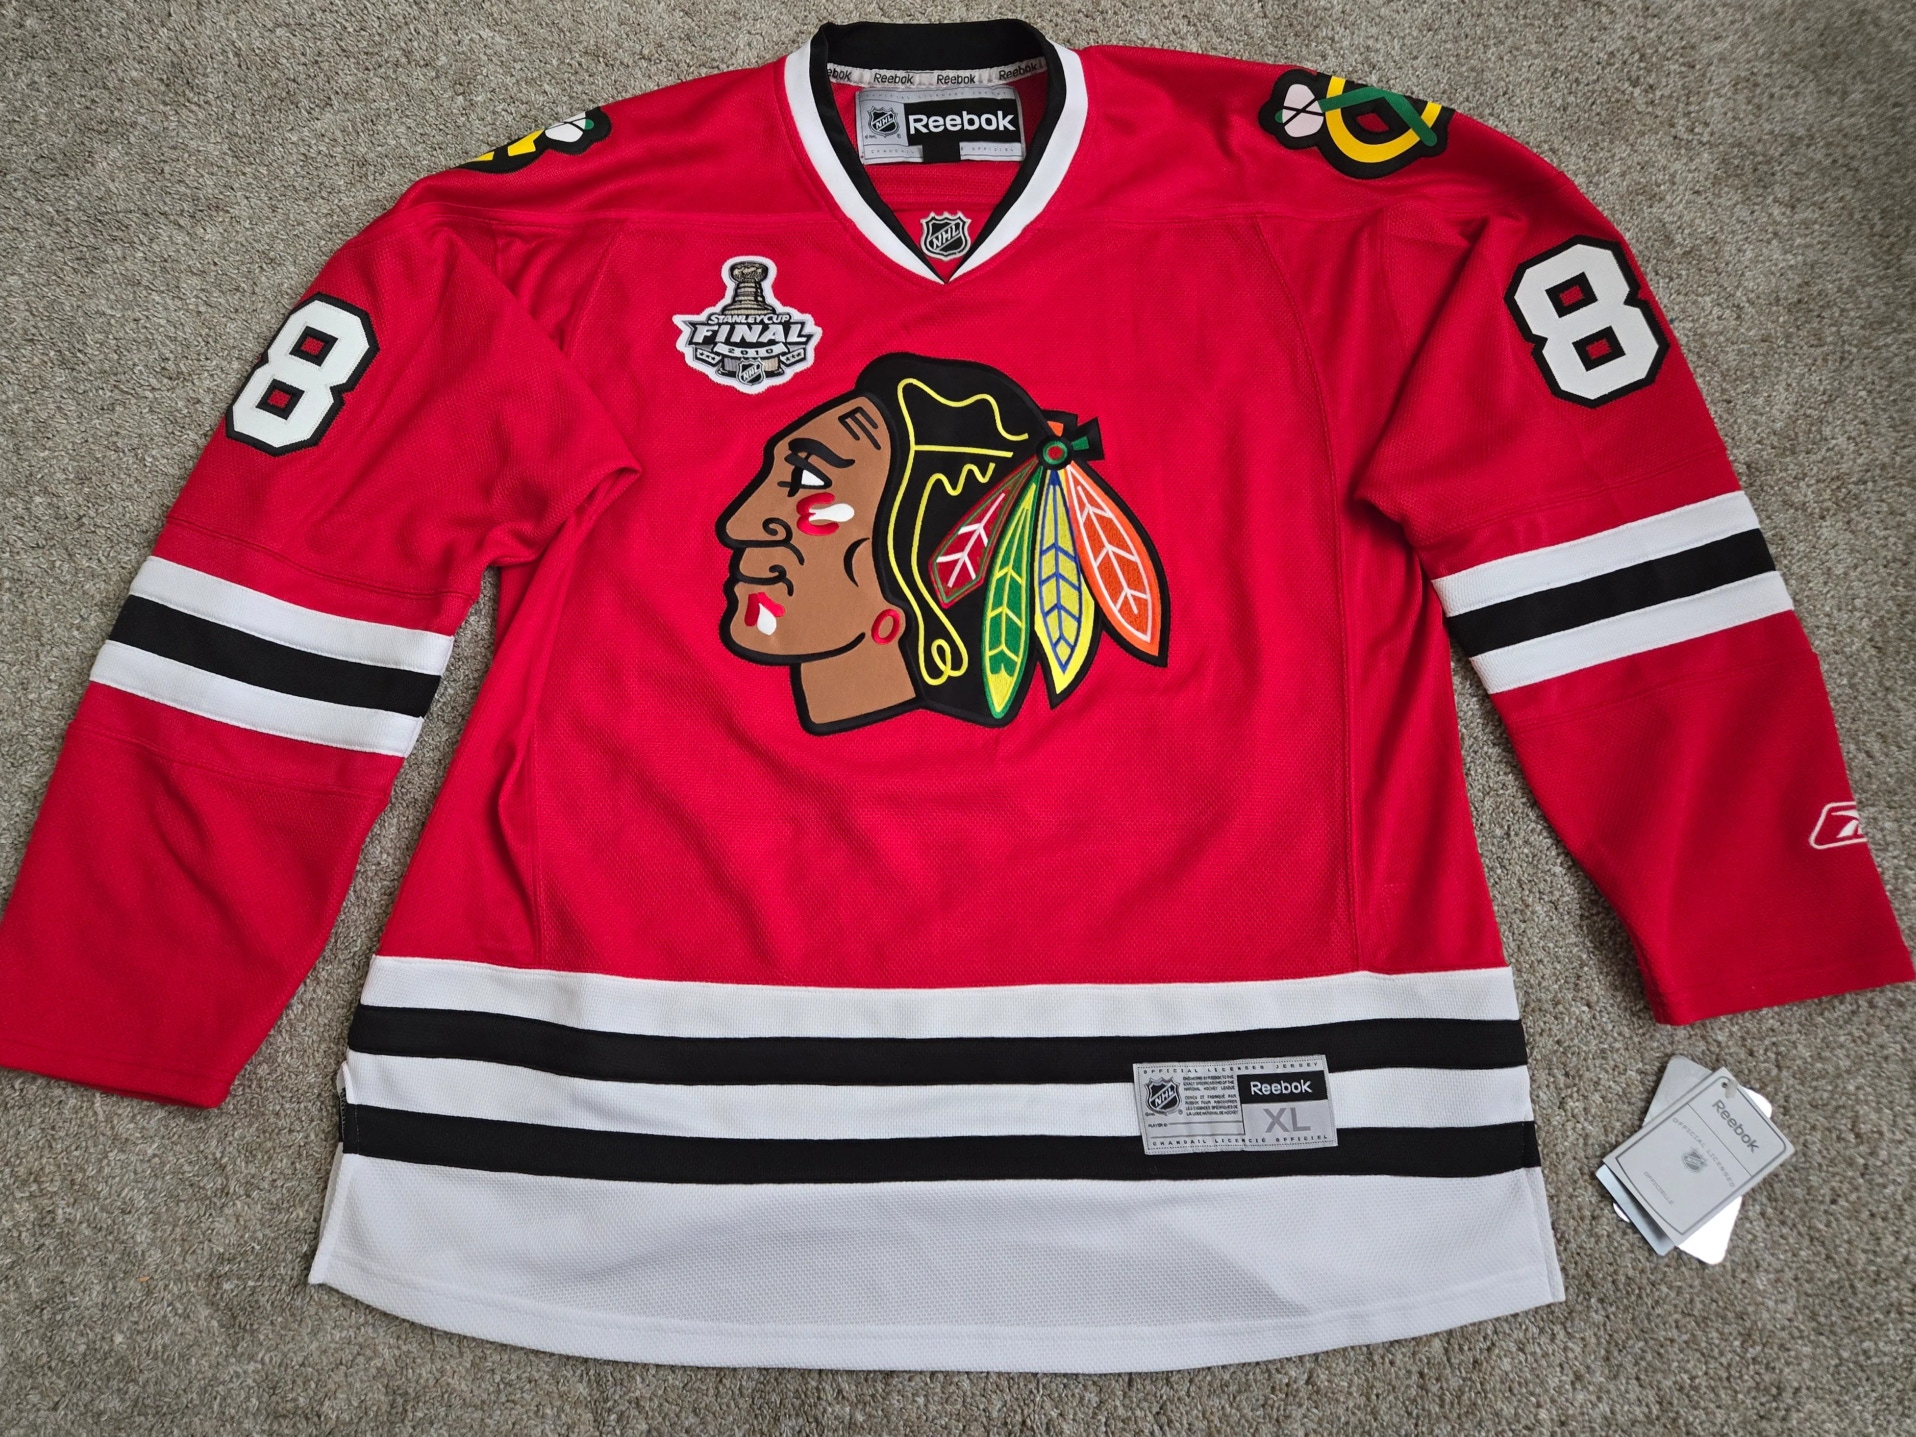 Patrick Kane "AUTOGRAPHED"2010 Stanley cup jersey (OBO)